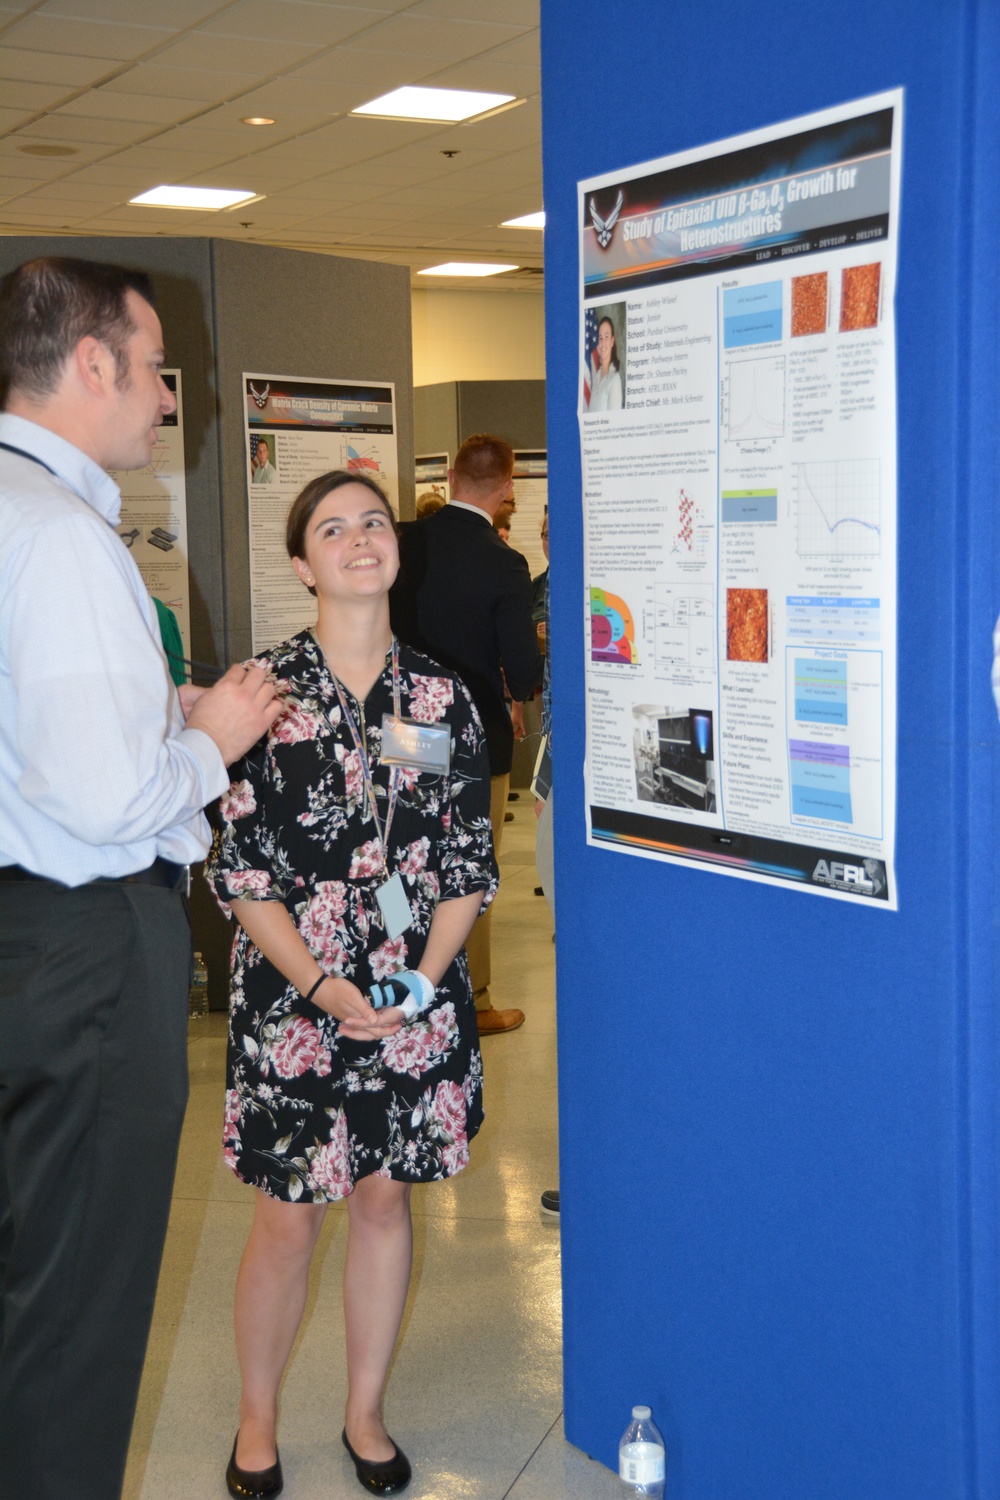 Students complete another successful summer intern program in AFRL